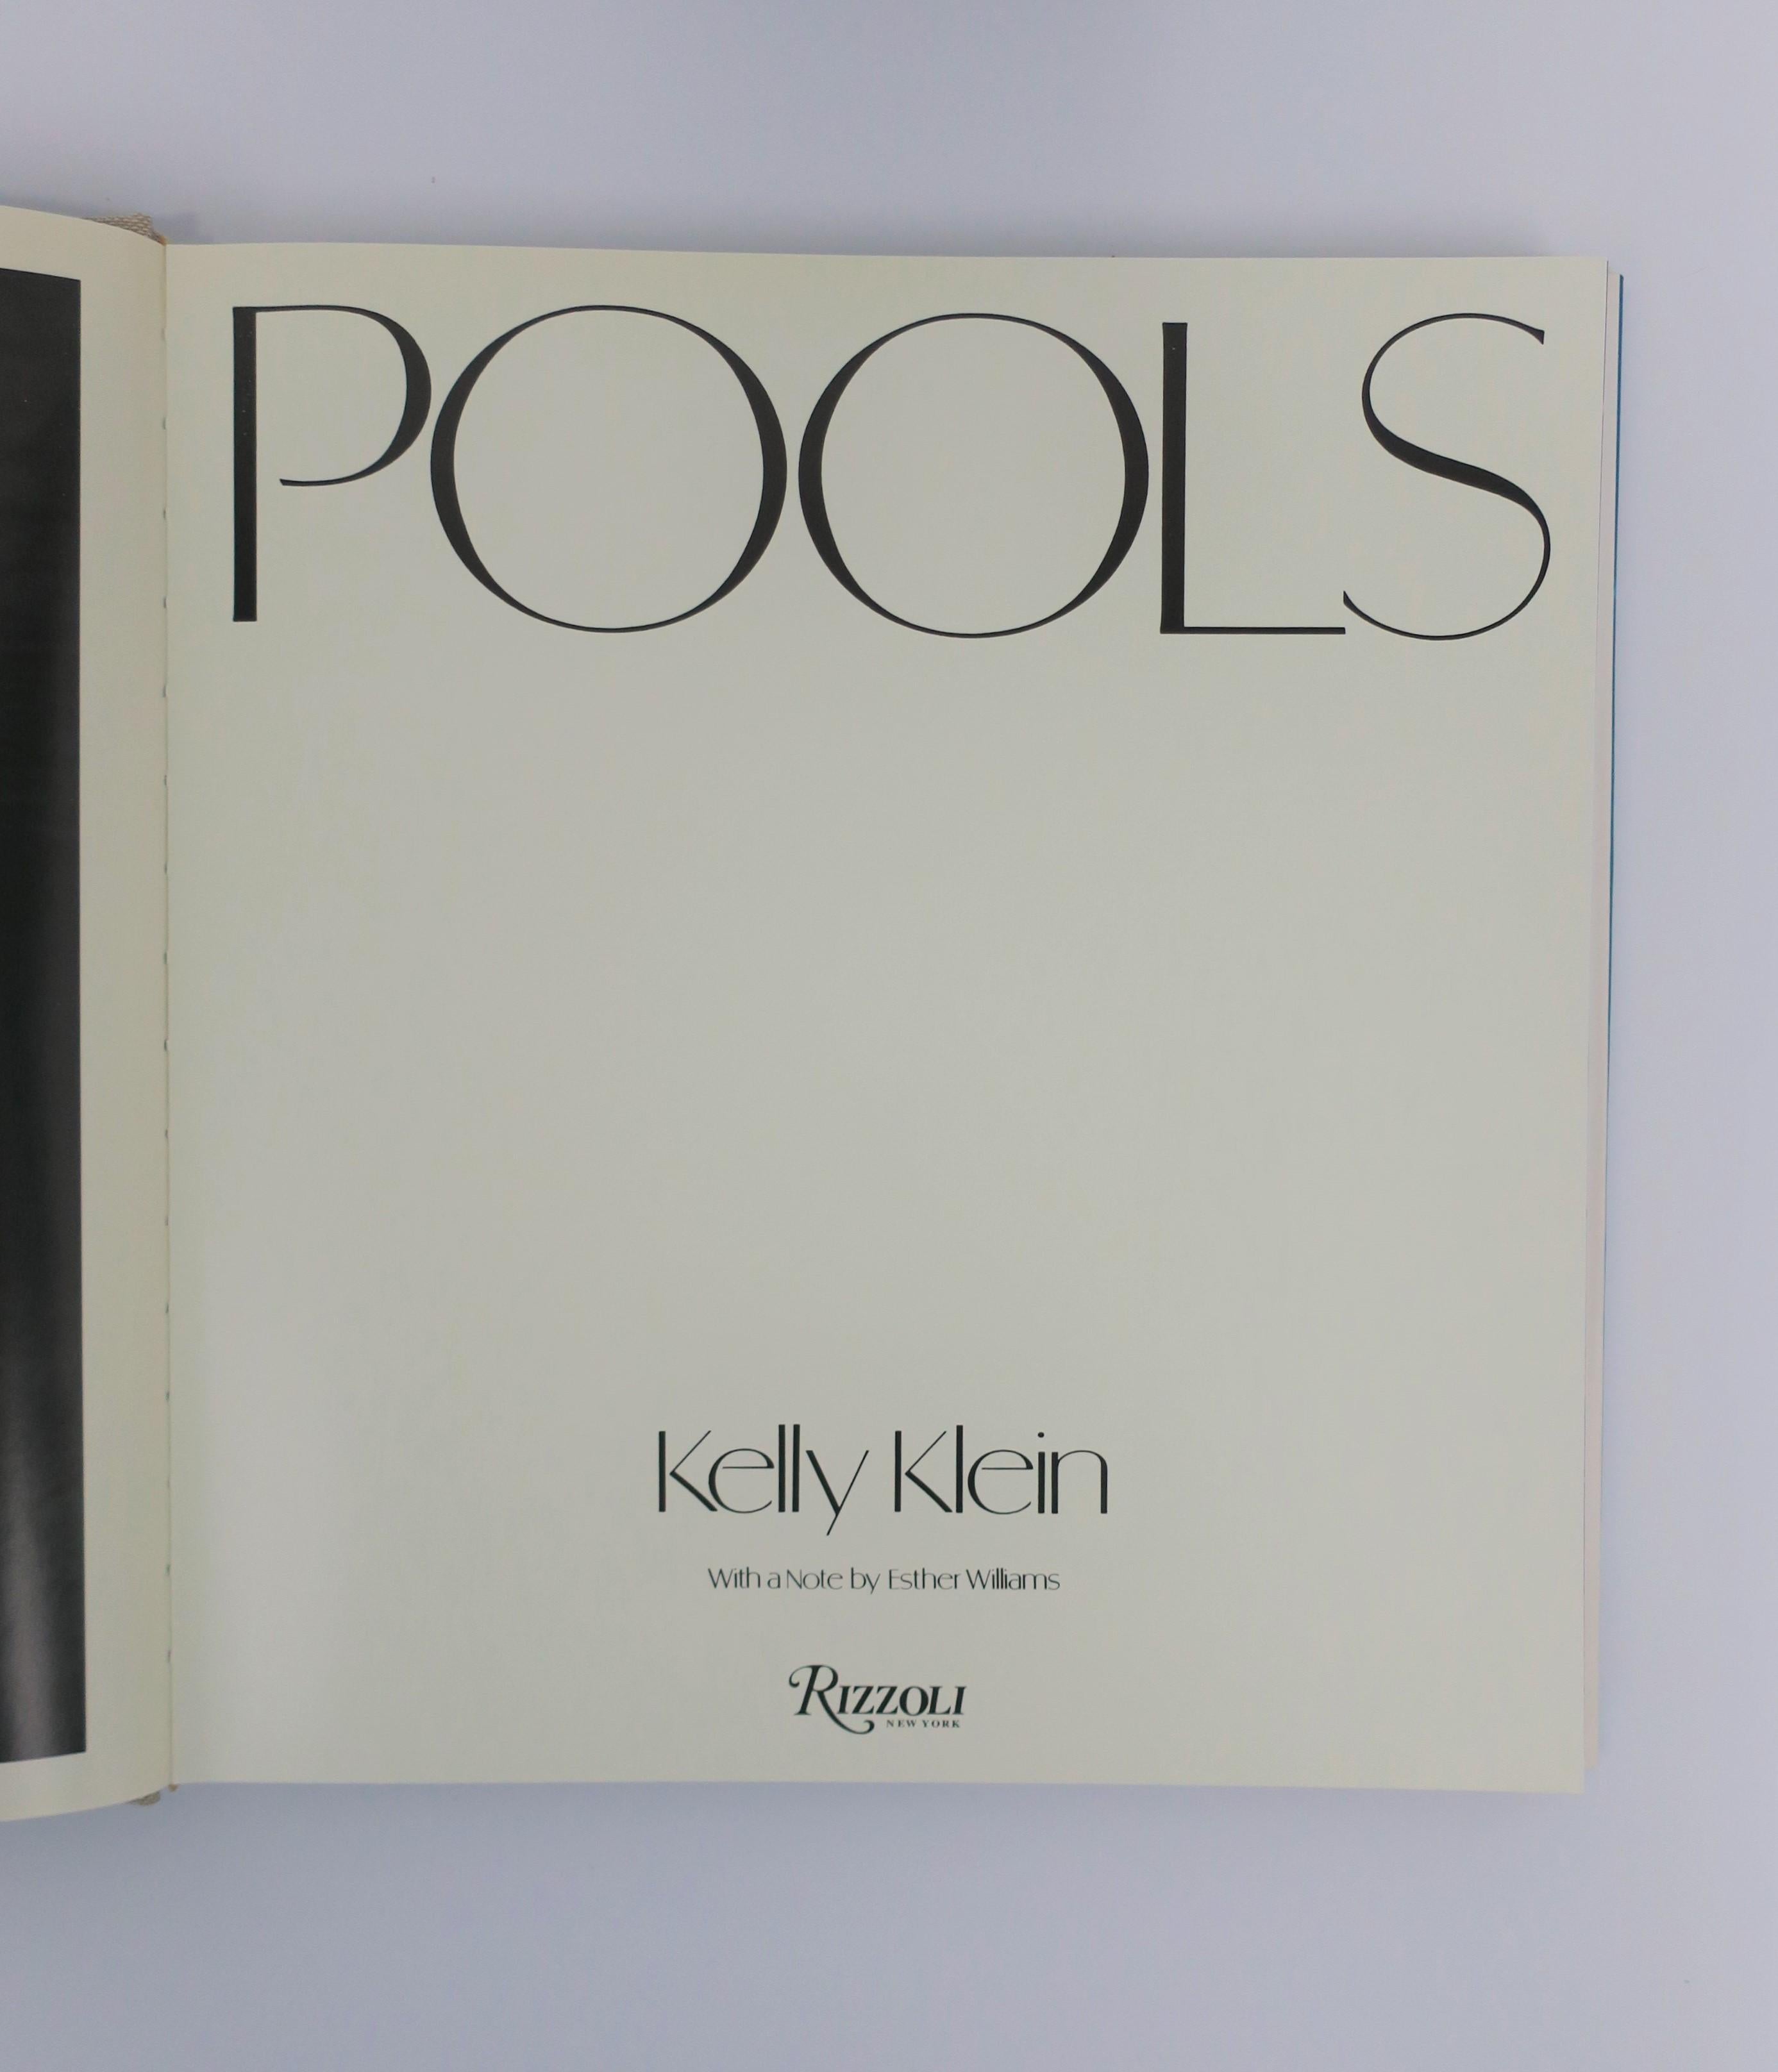 Contemporary Pools by Kelly Klein an Architecture Coffee Table or Library Book